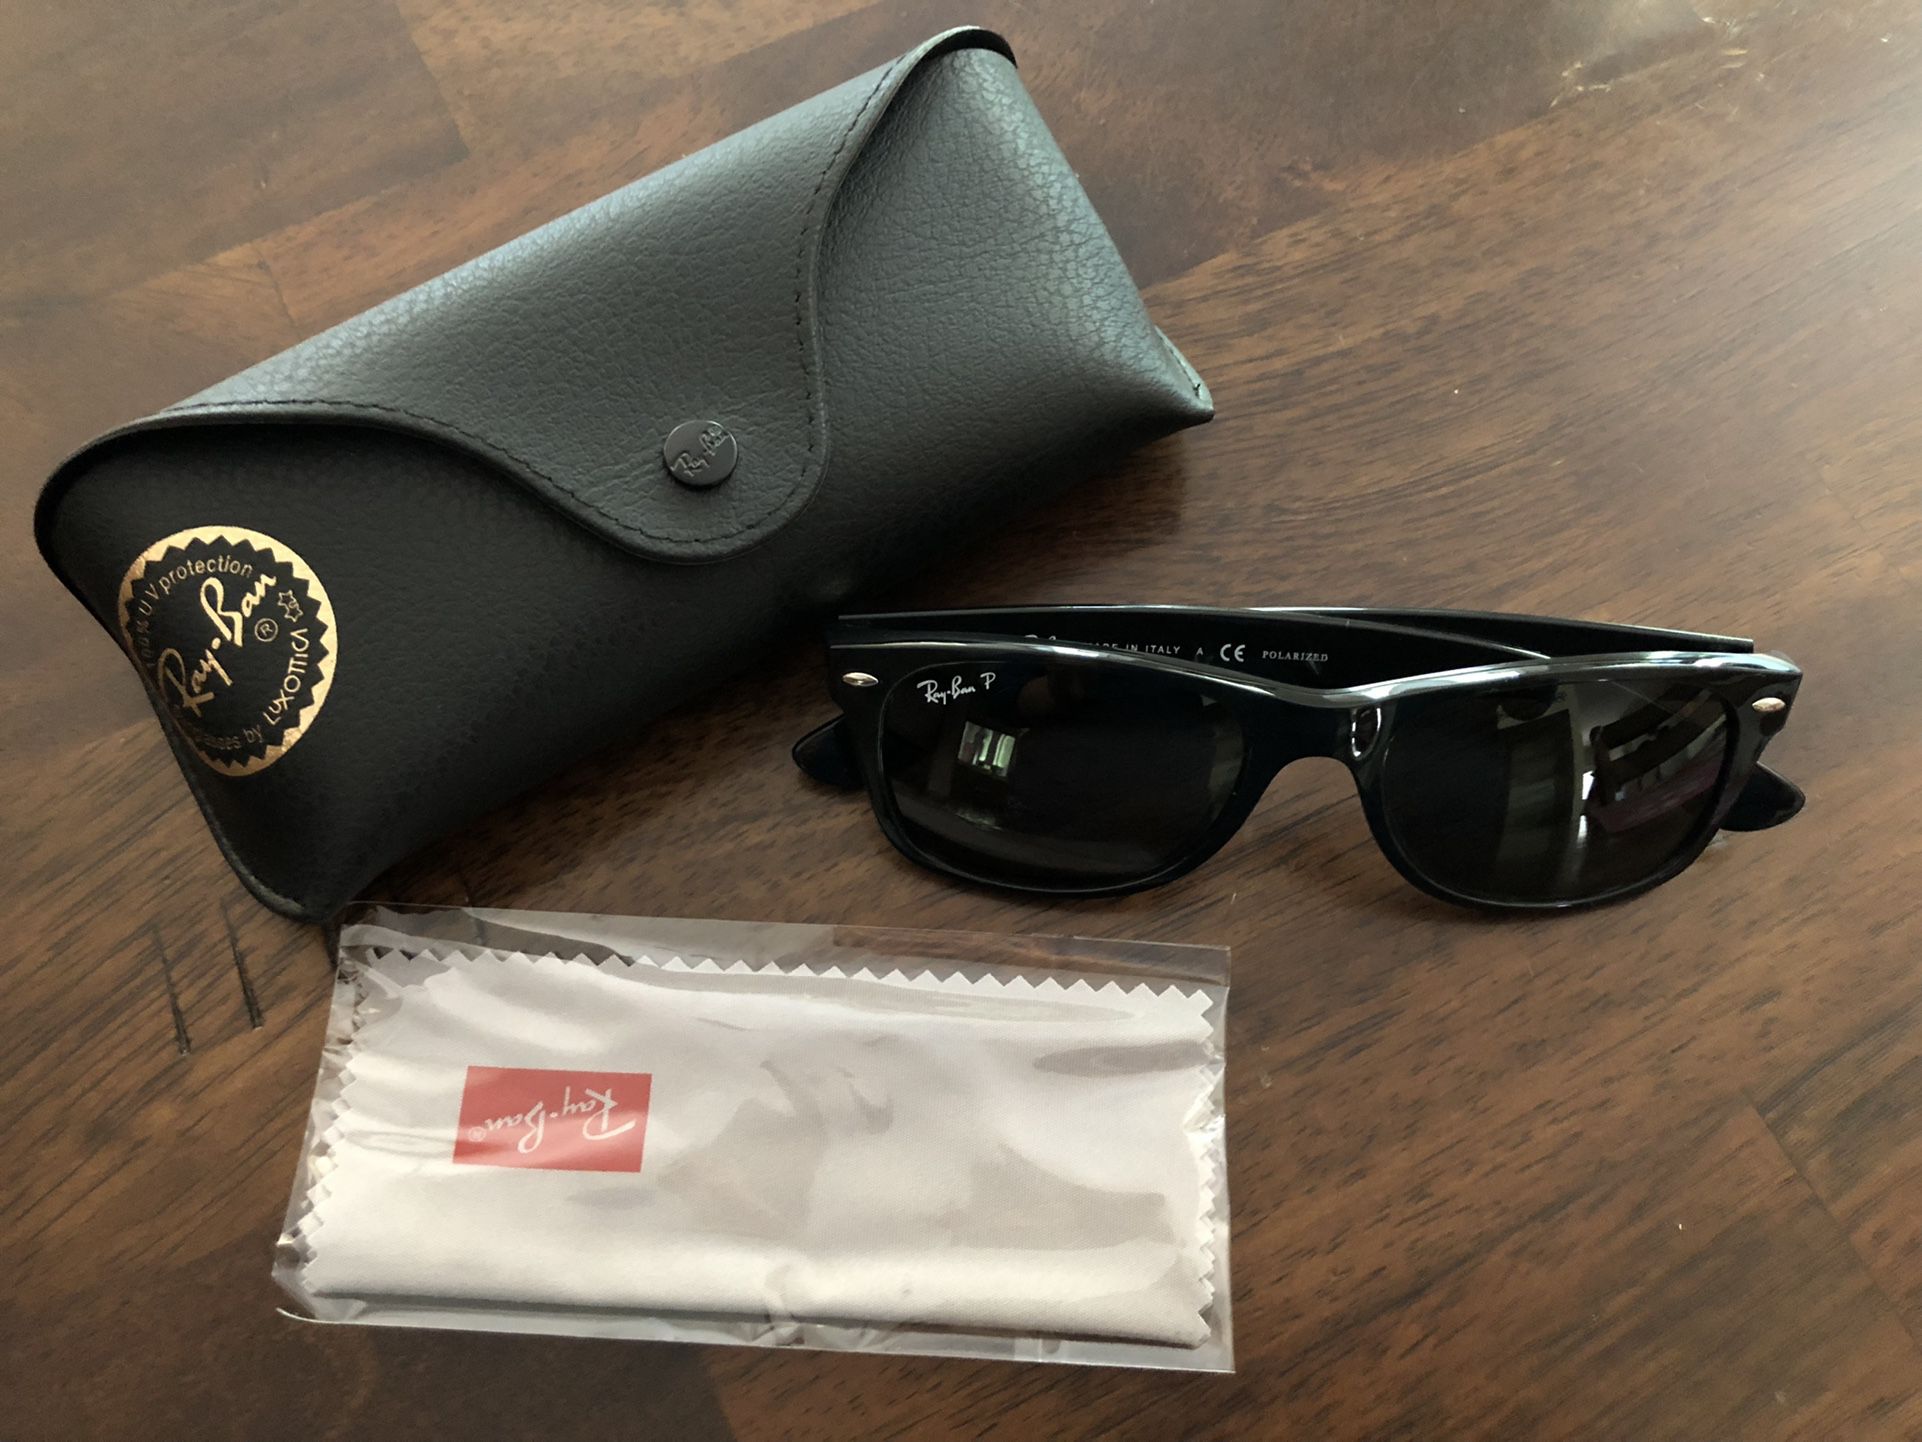 Rayban polarized Women’s sunglasses new wayfarer, brand new. Includes case and cloth. Never worn, guaranteed authentic. Retail $200.